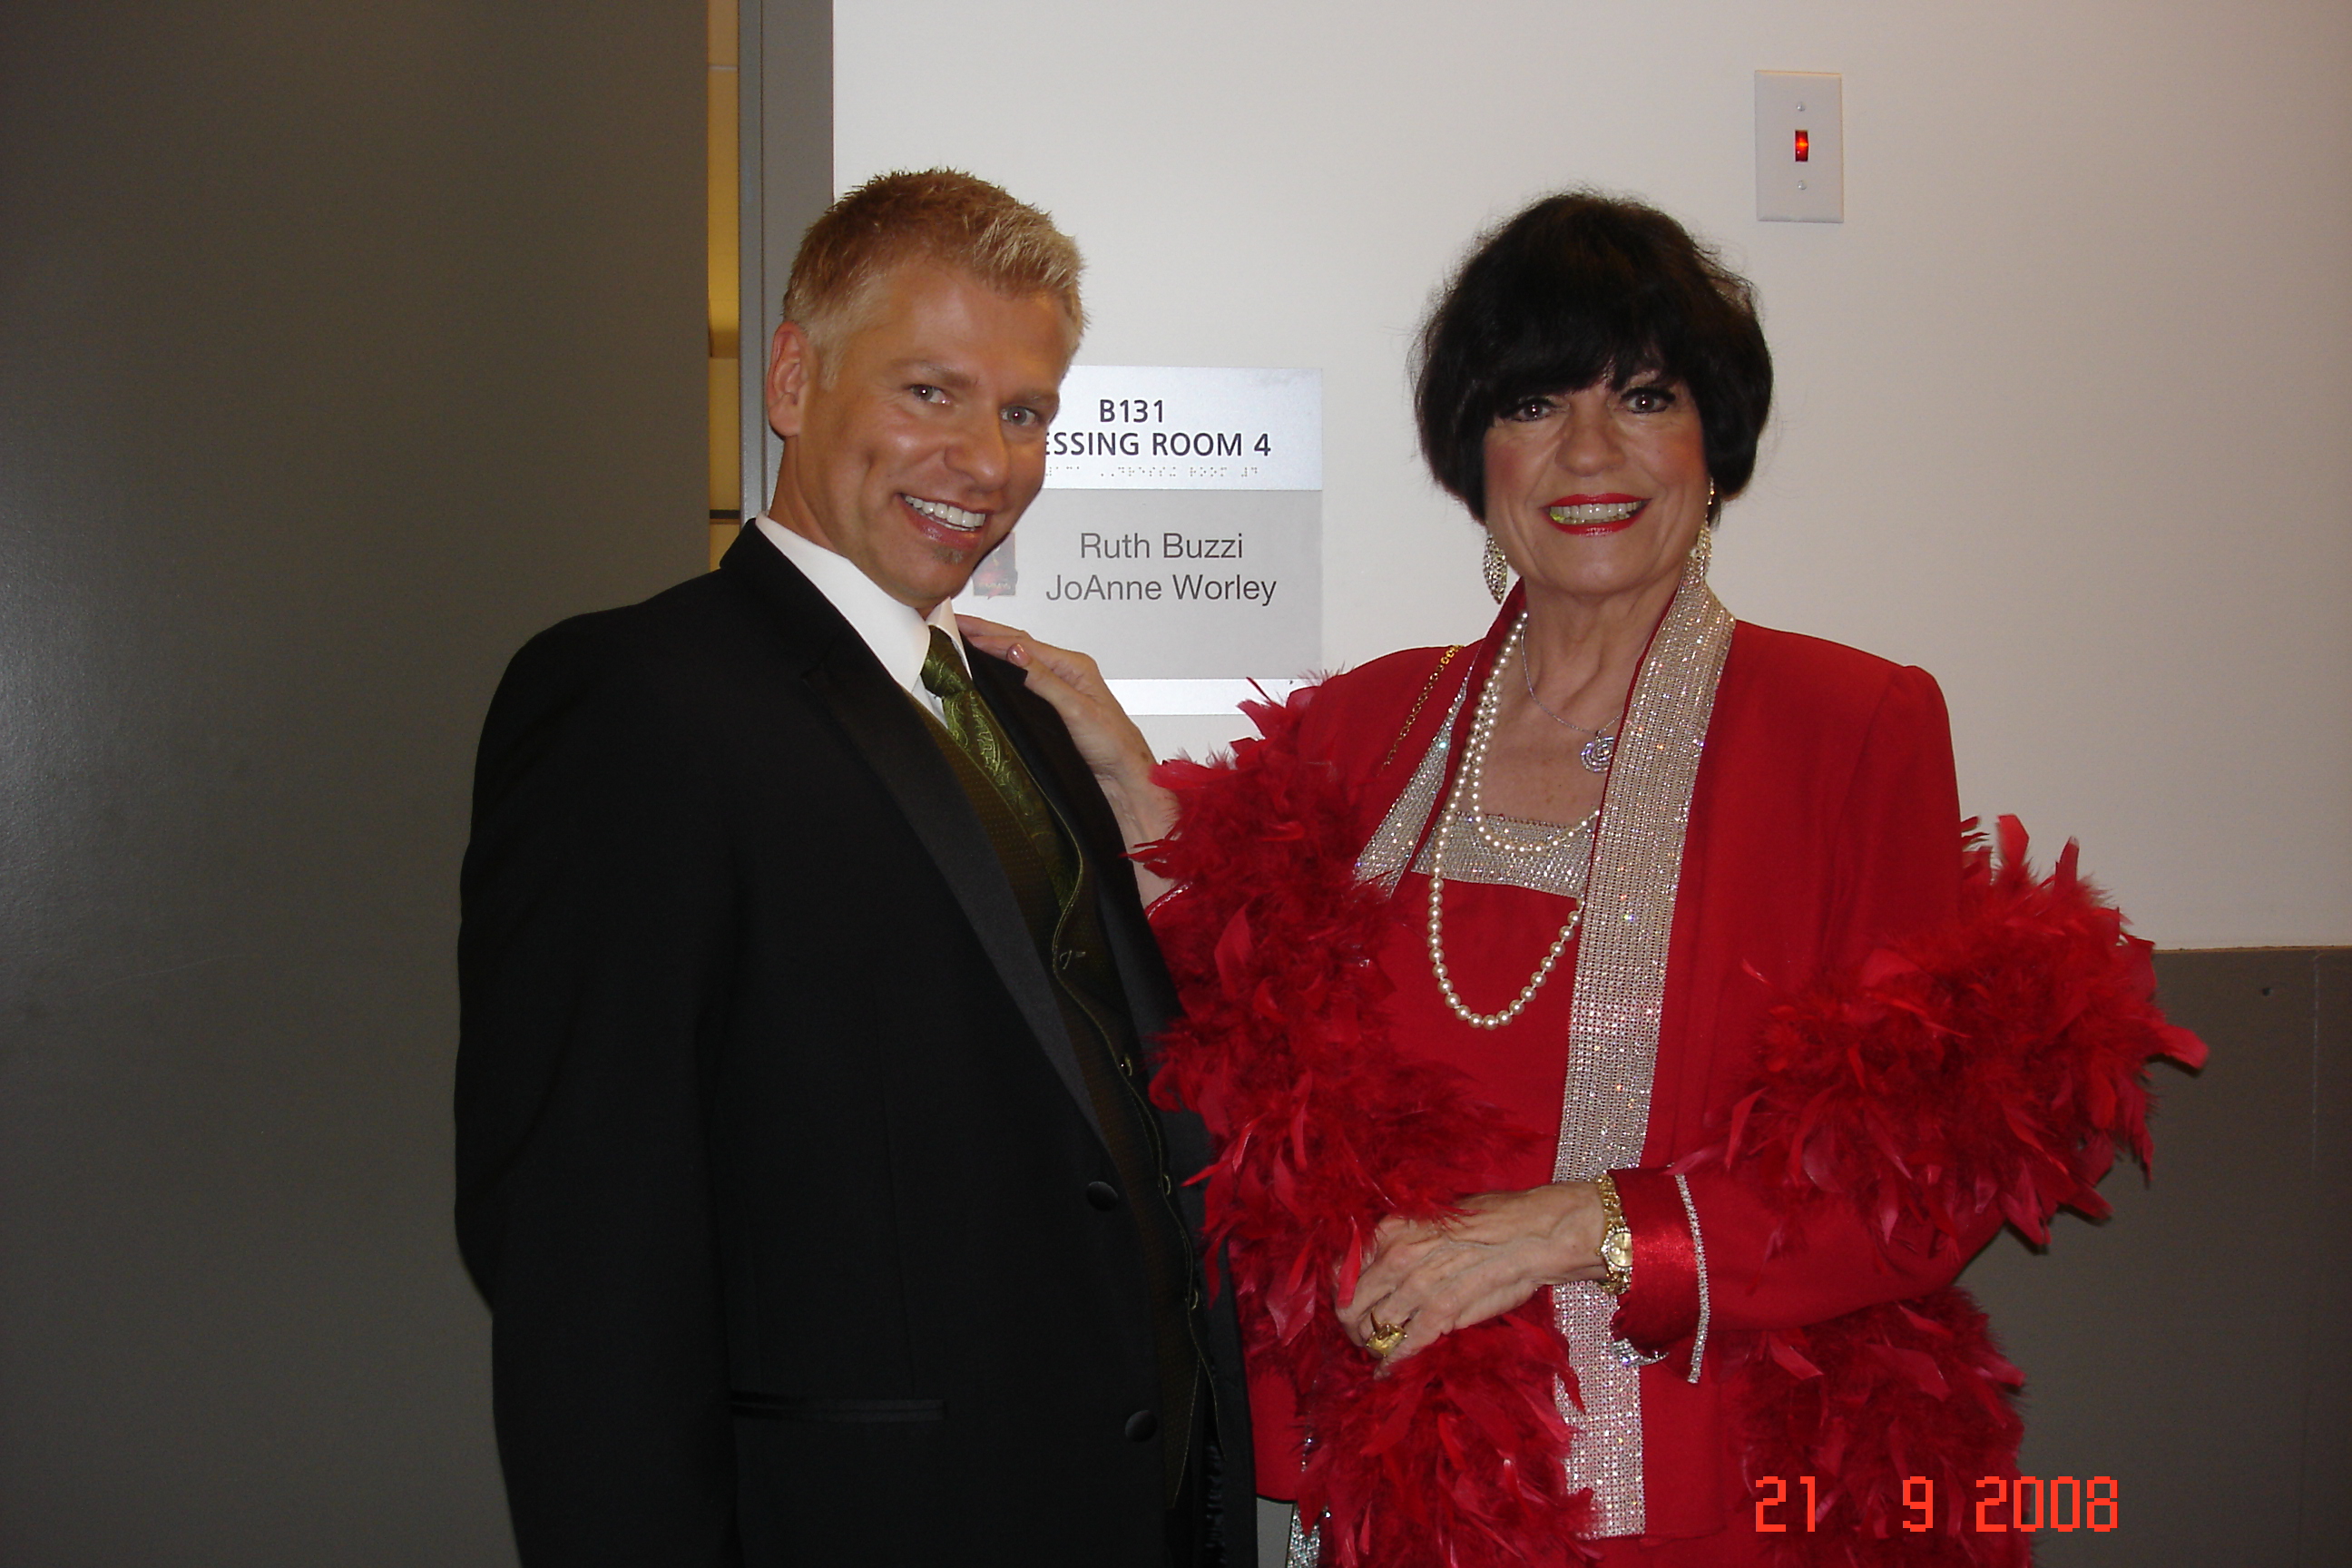 with Jo Anne worley at the 2008 EMMY AWARDS.